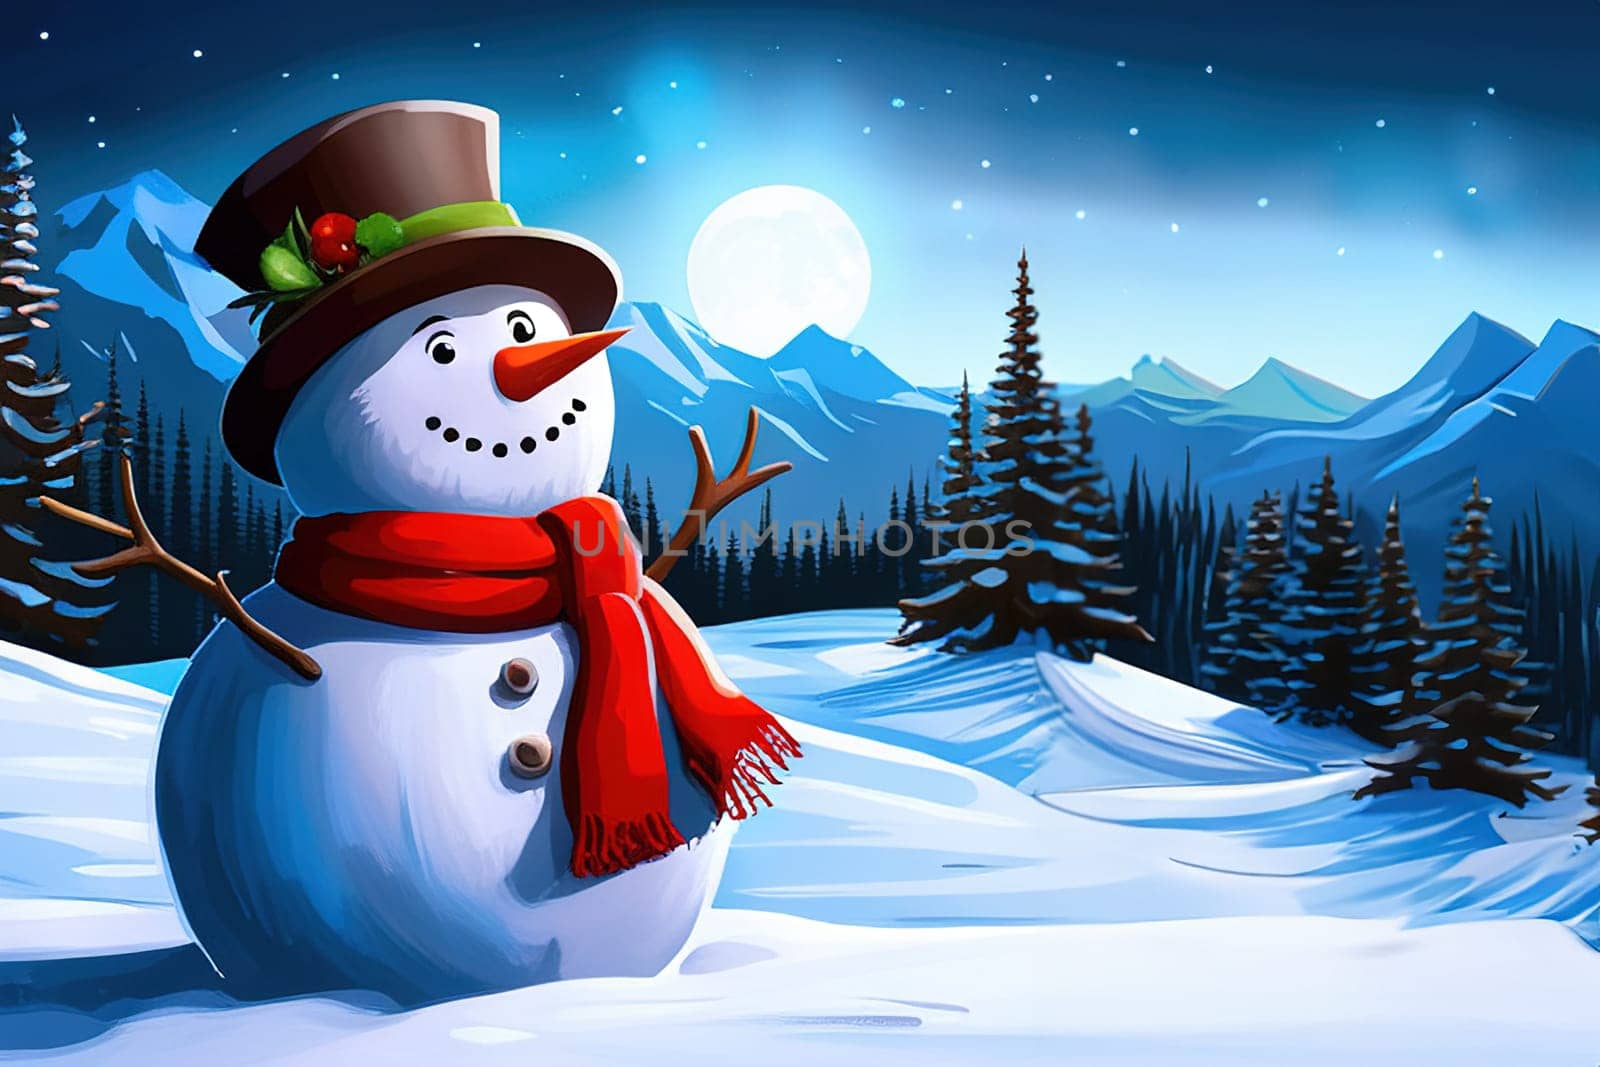 Smiling snowman on winter snowy background, perfect for holiday designs